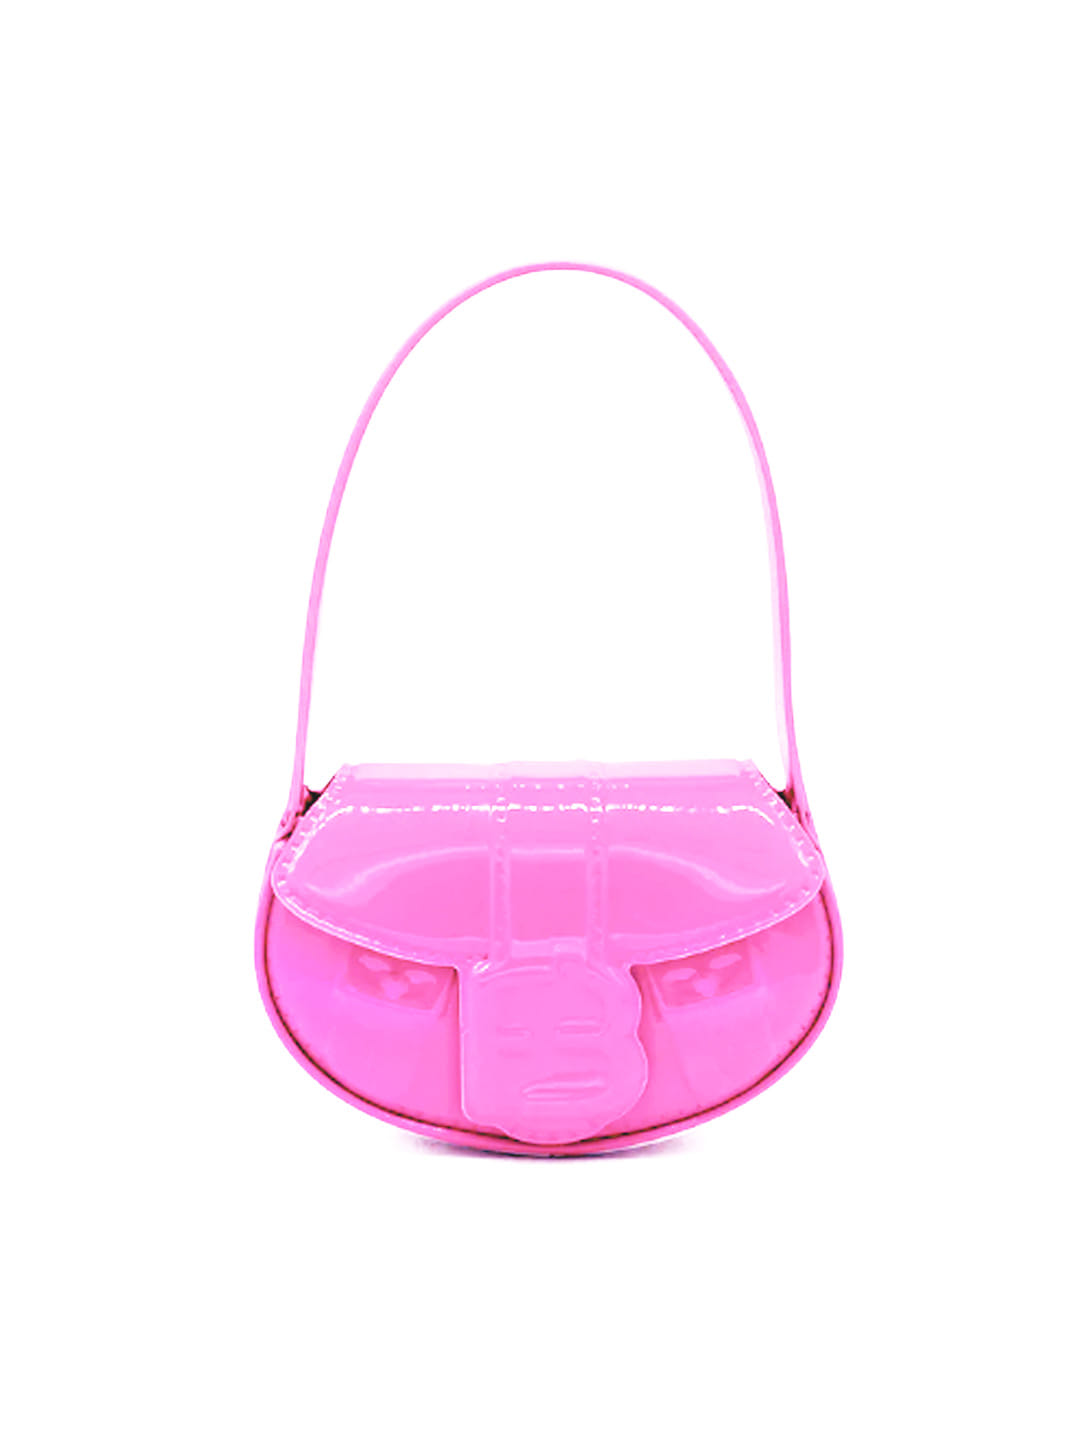 FOR BITCHESMy boo bag - Varn Fuxia